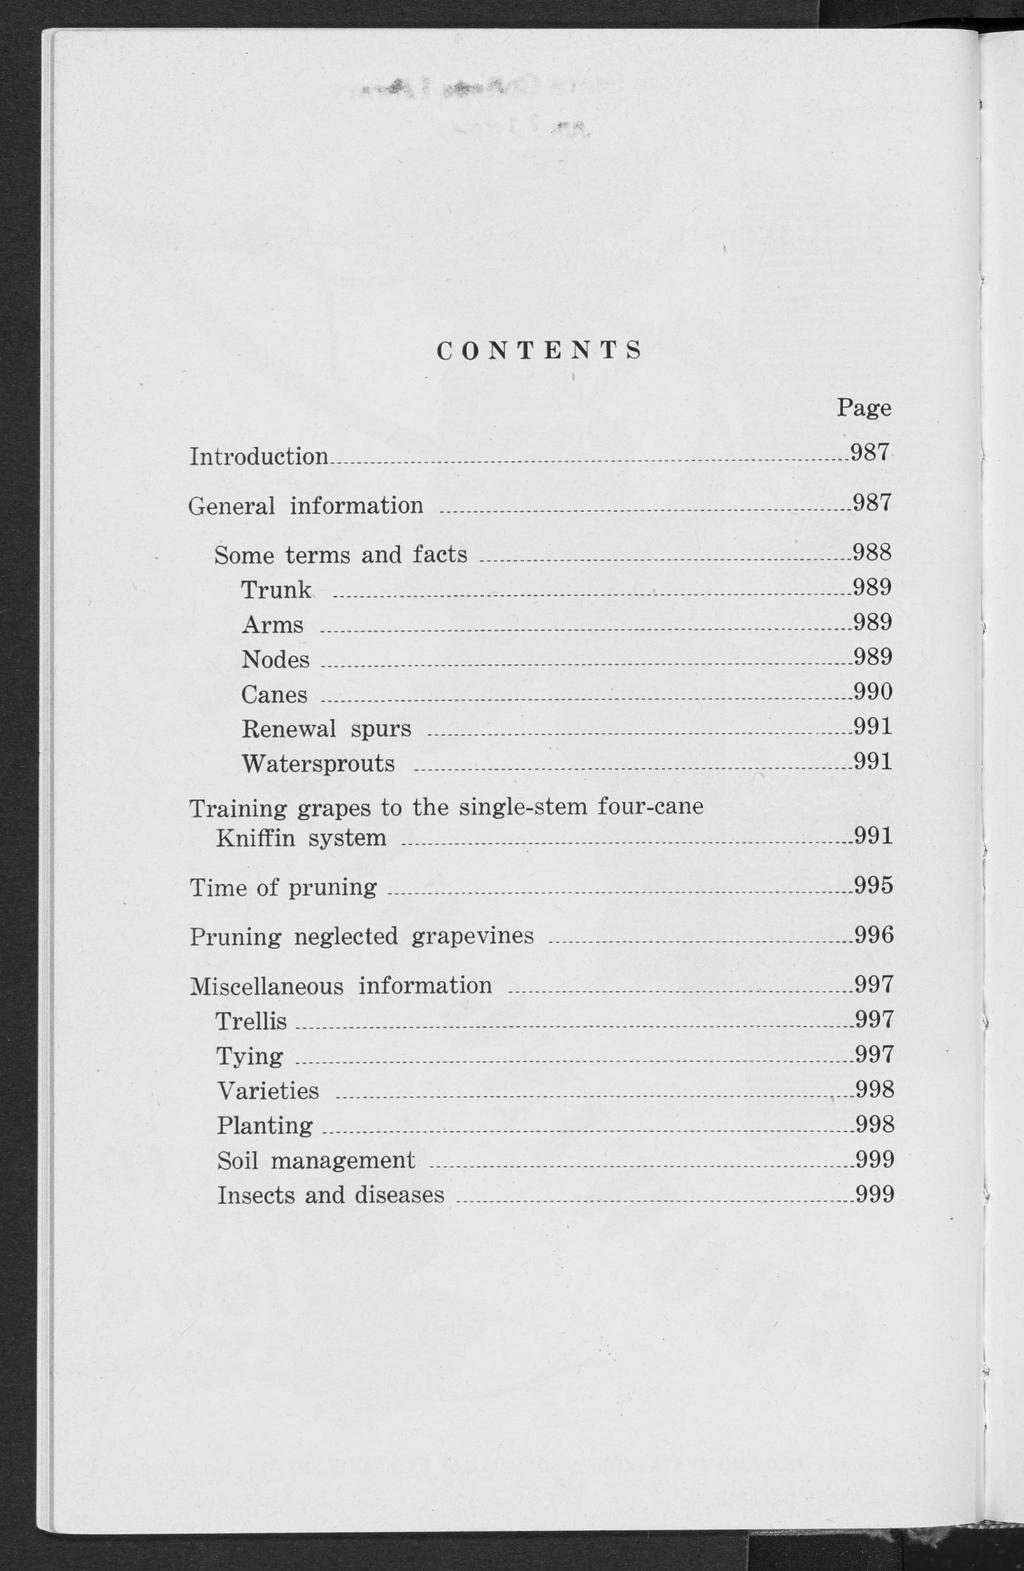 Bulletin P, Vol. 4, No. 90 [1948], Art. 1 CONTENTS Page Introduction...... -...987 General information... 987 Some terms and fa c ts............988 Trunk.........989 Arms......-,... 989 Nodes.